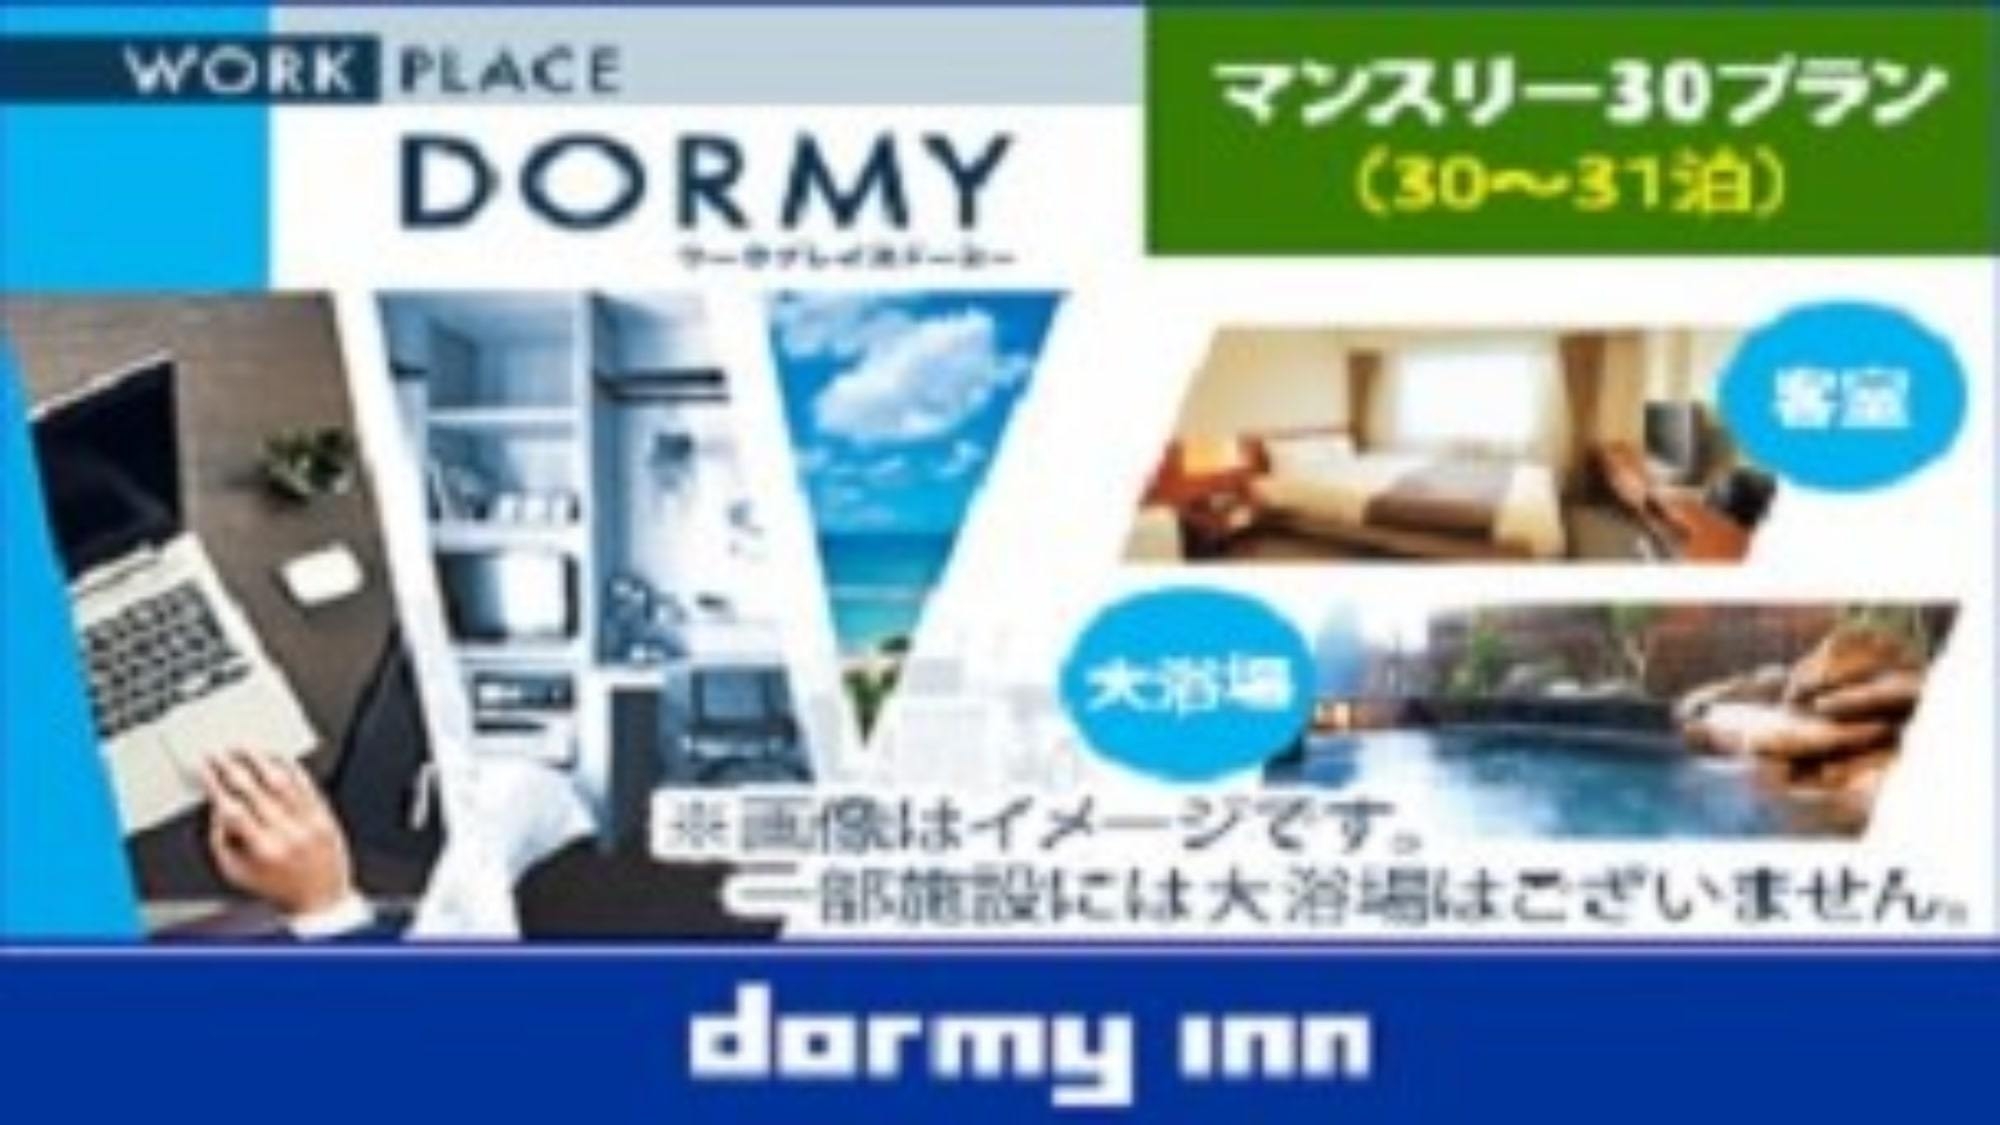 【WORK PLACE DORMY】マンスリープラン（30〜31泊）素泊り